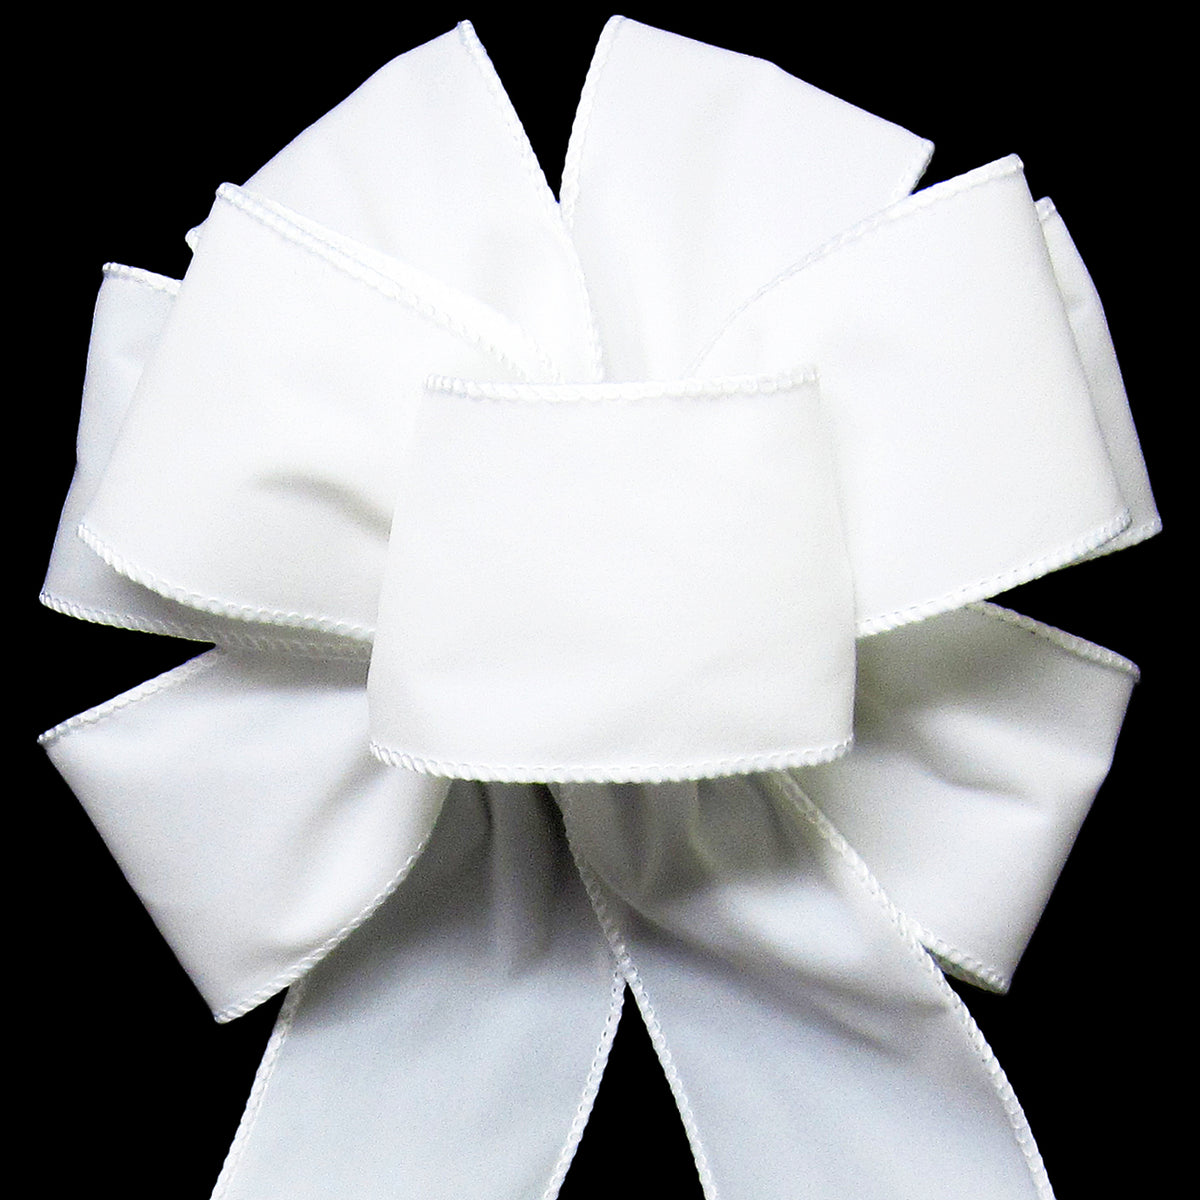 Hand tied Bows - Wired Indoor Outdoor Black Velvet Bow 8 Inch